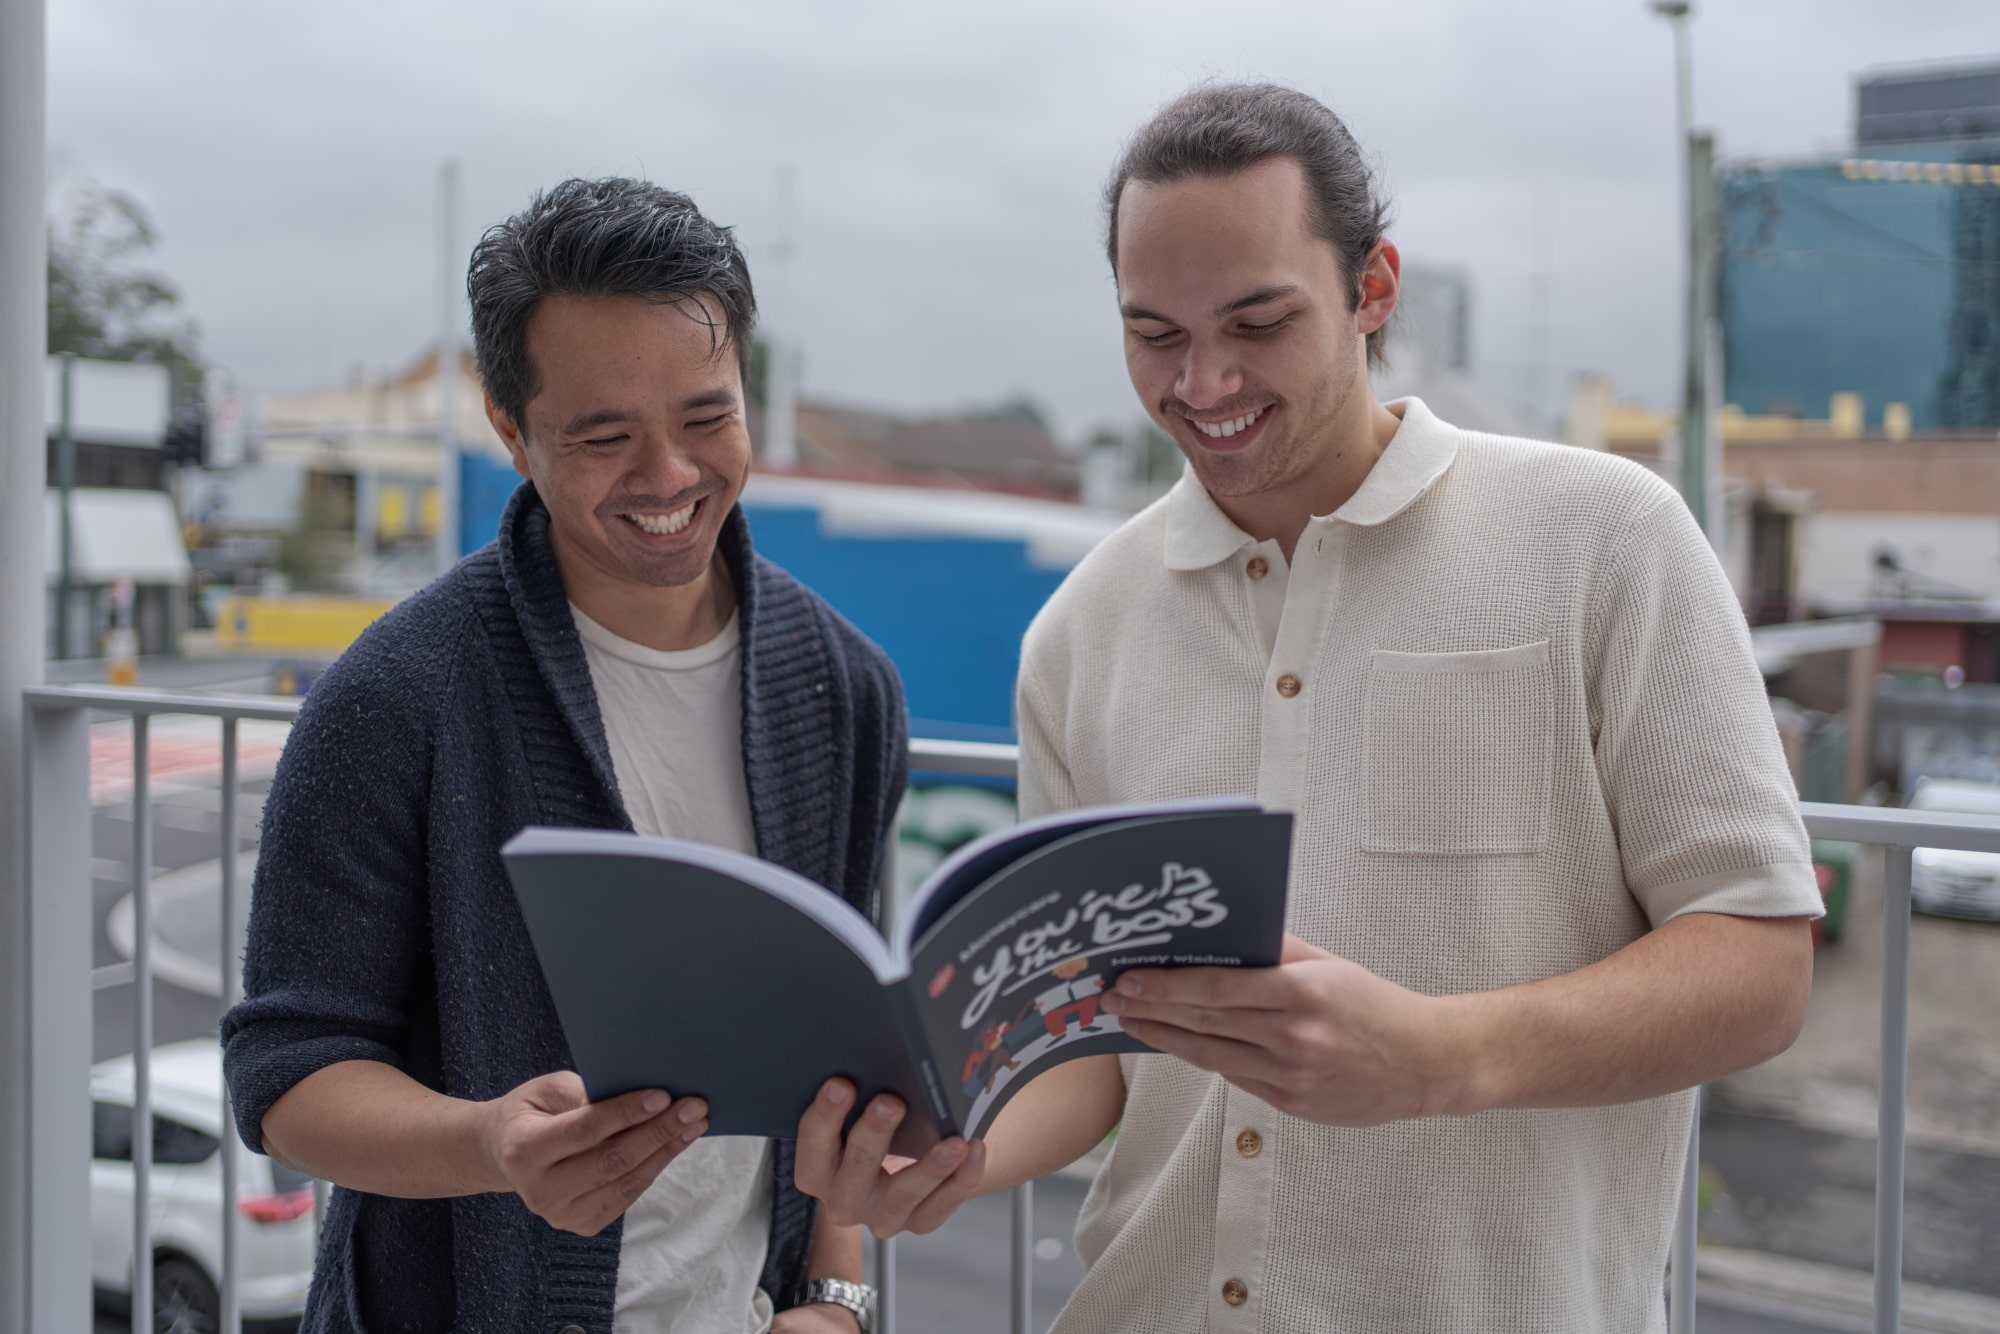 Header image of two smiling individuals reading You're the Boss booklet